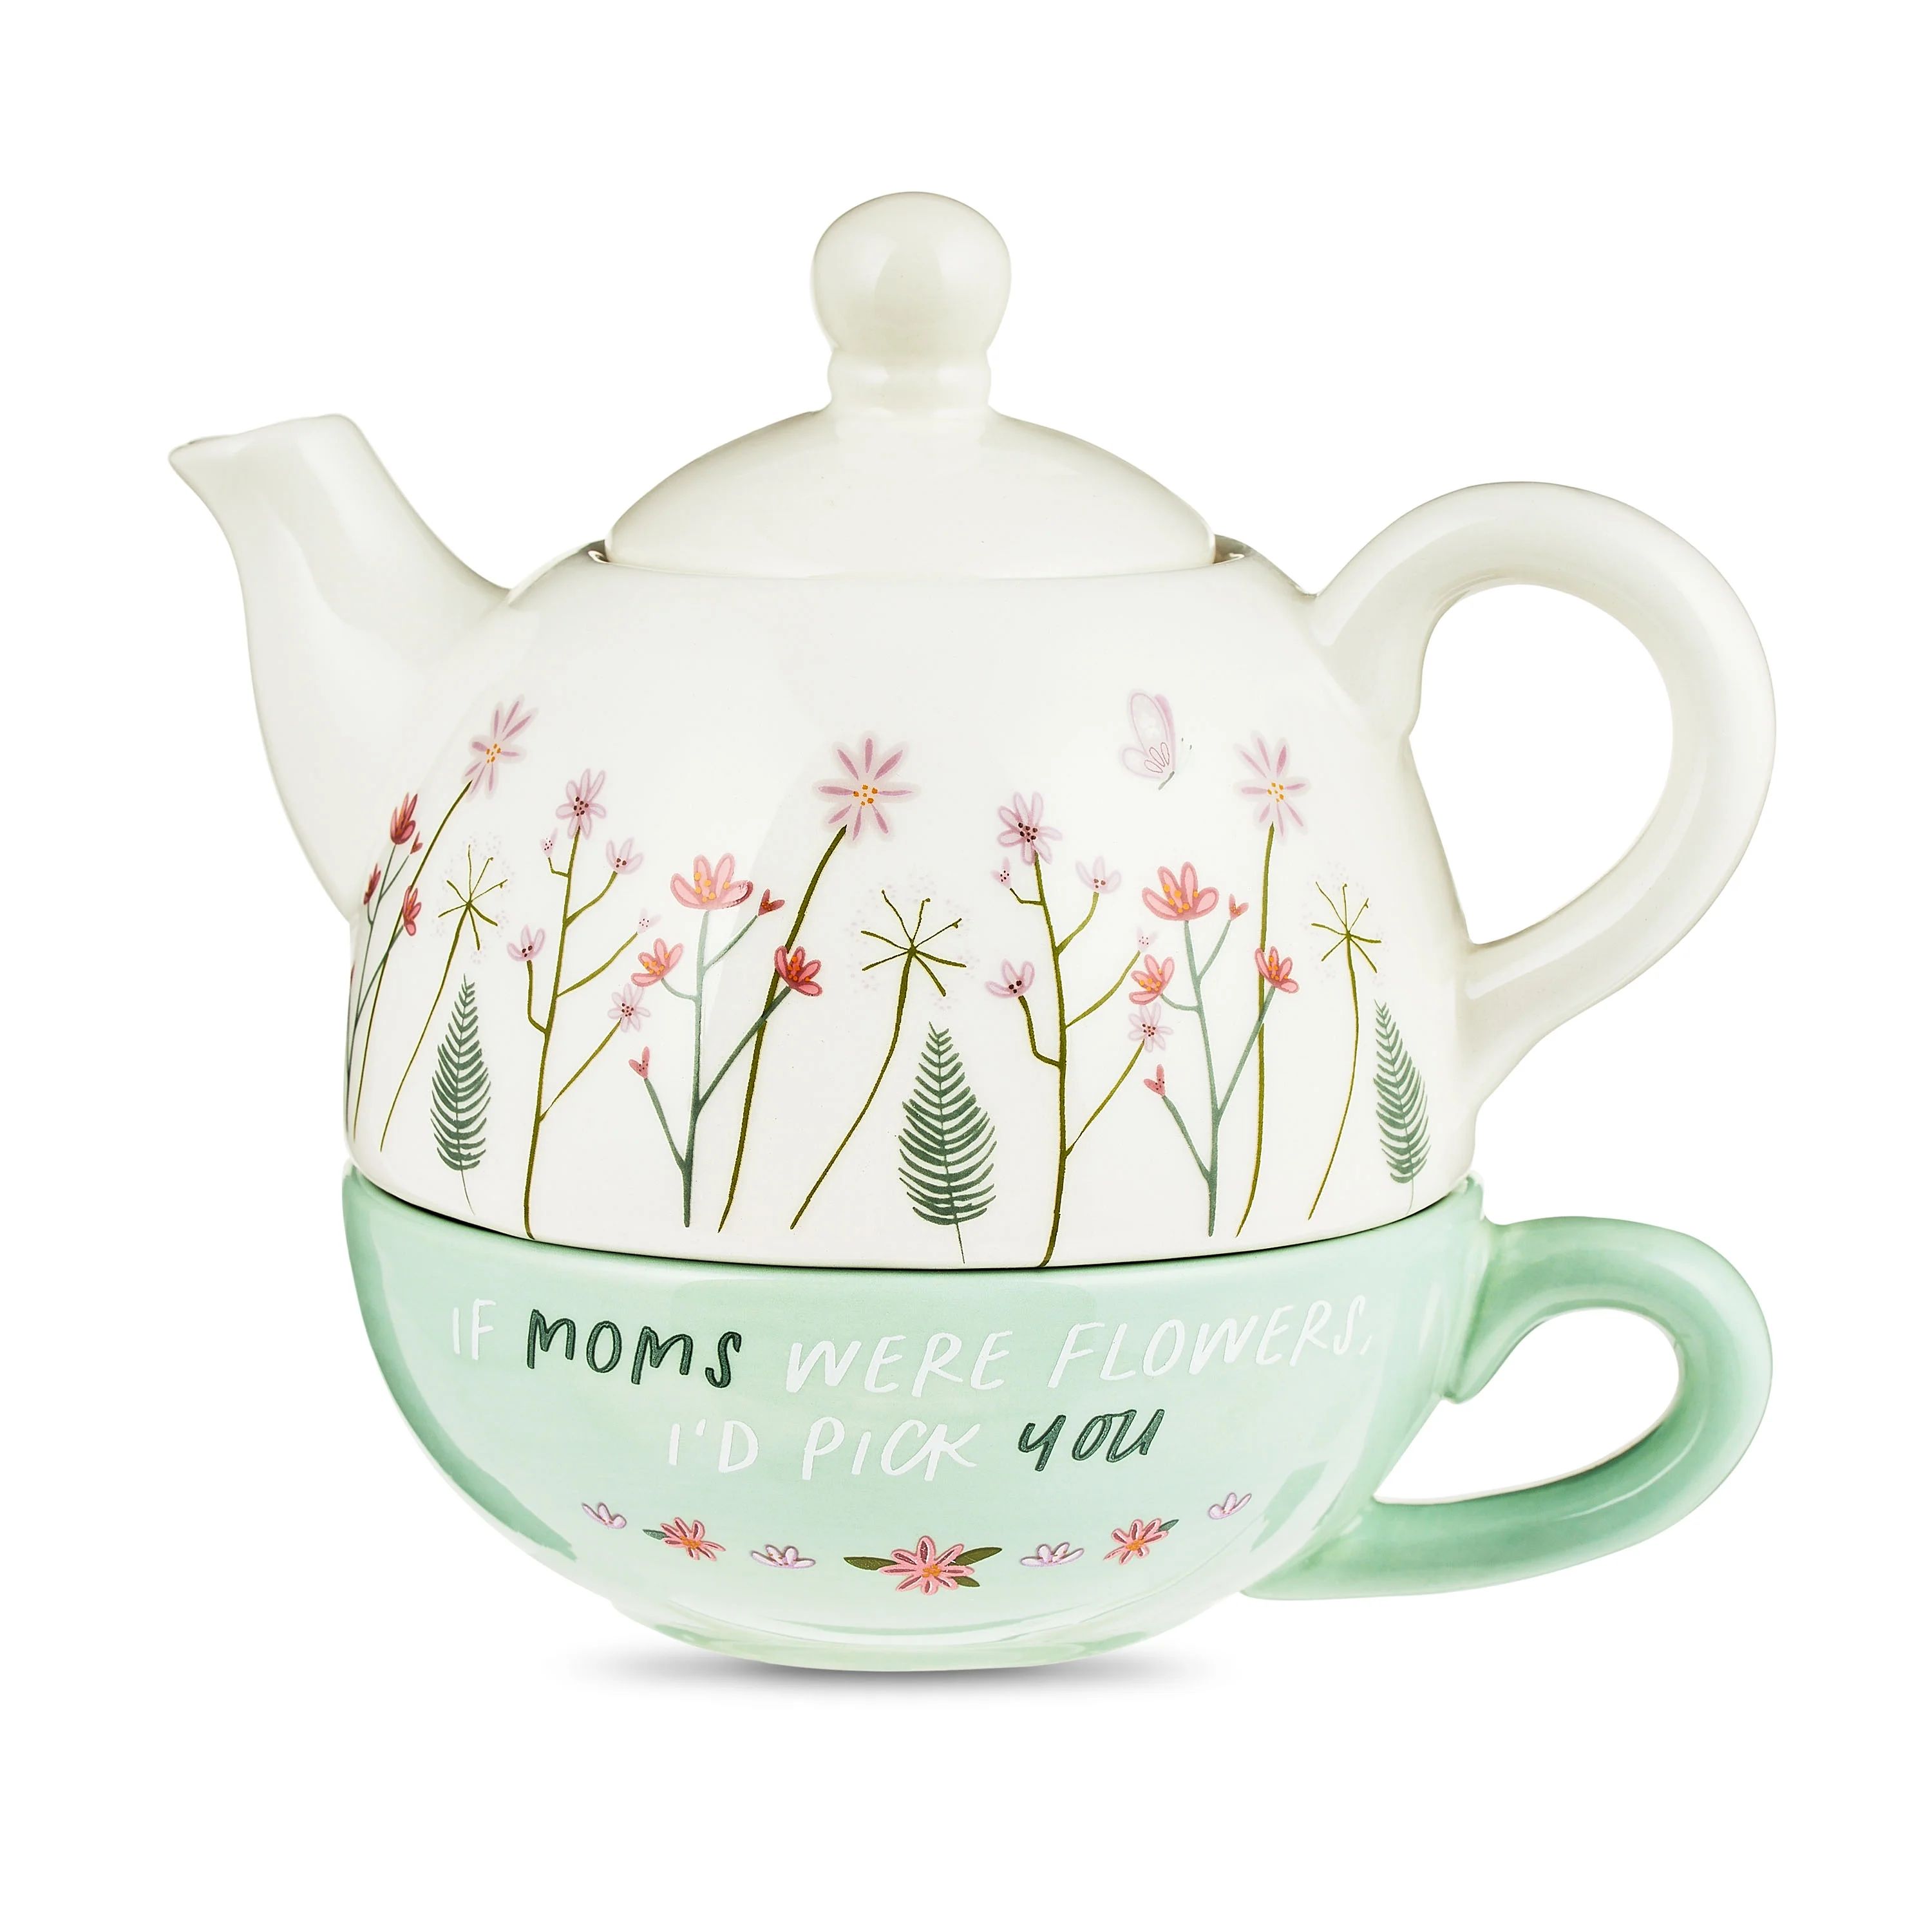 Mother's Day Green & White Teapot Gift Set, Model: IG187834-B by Way To Celebrate | Walmart (US)